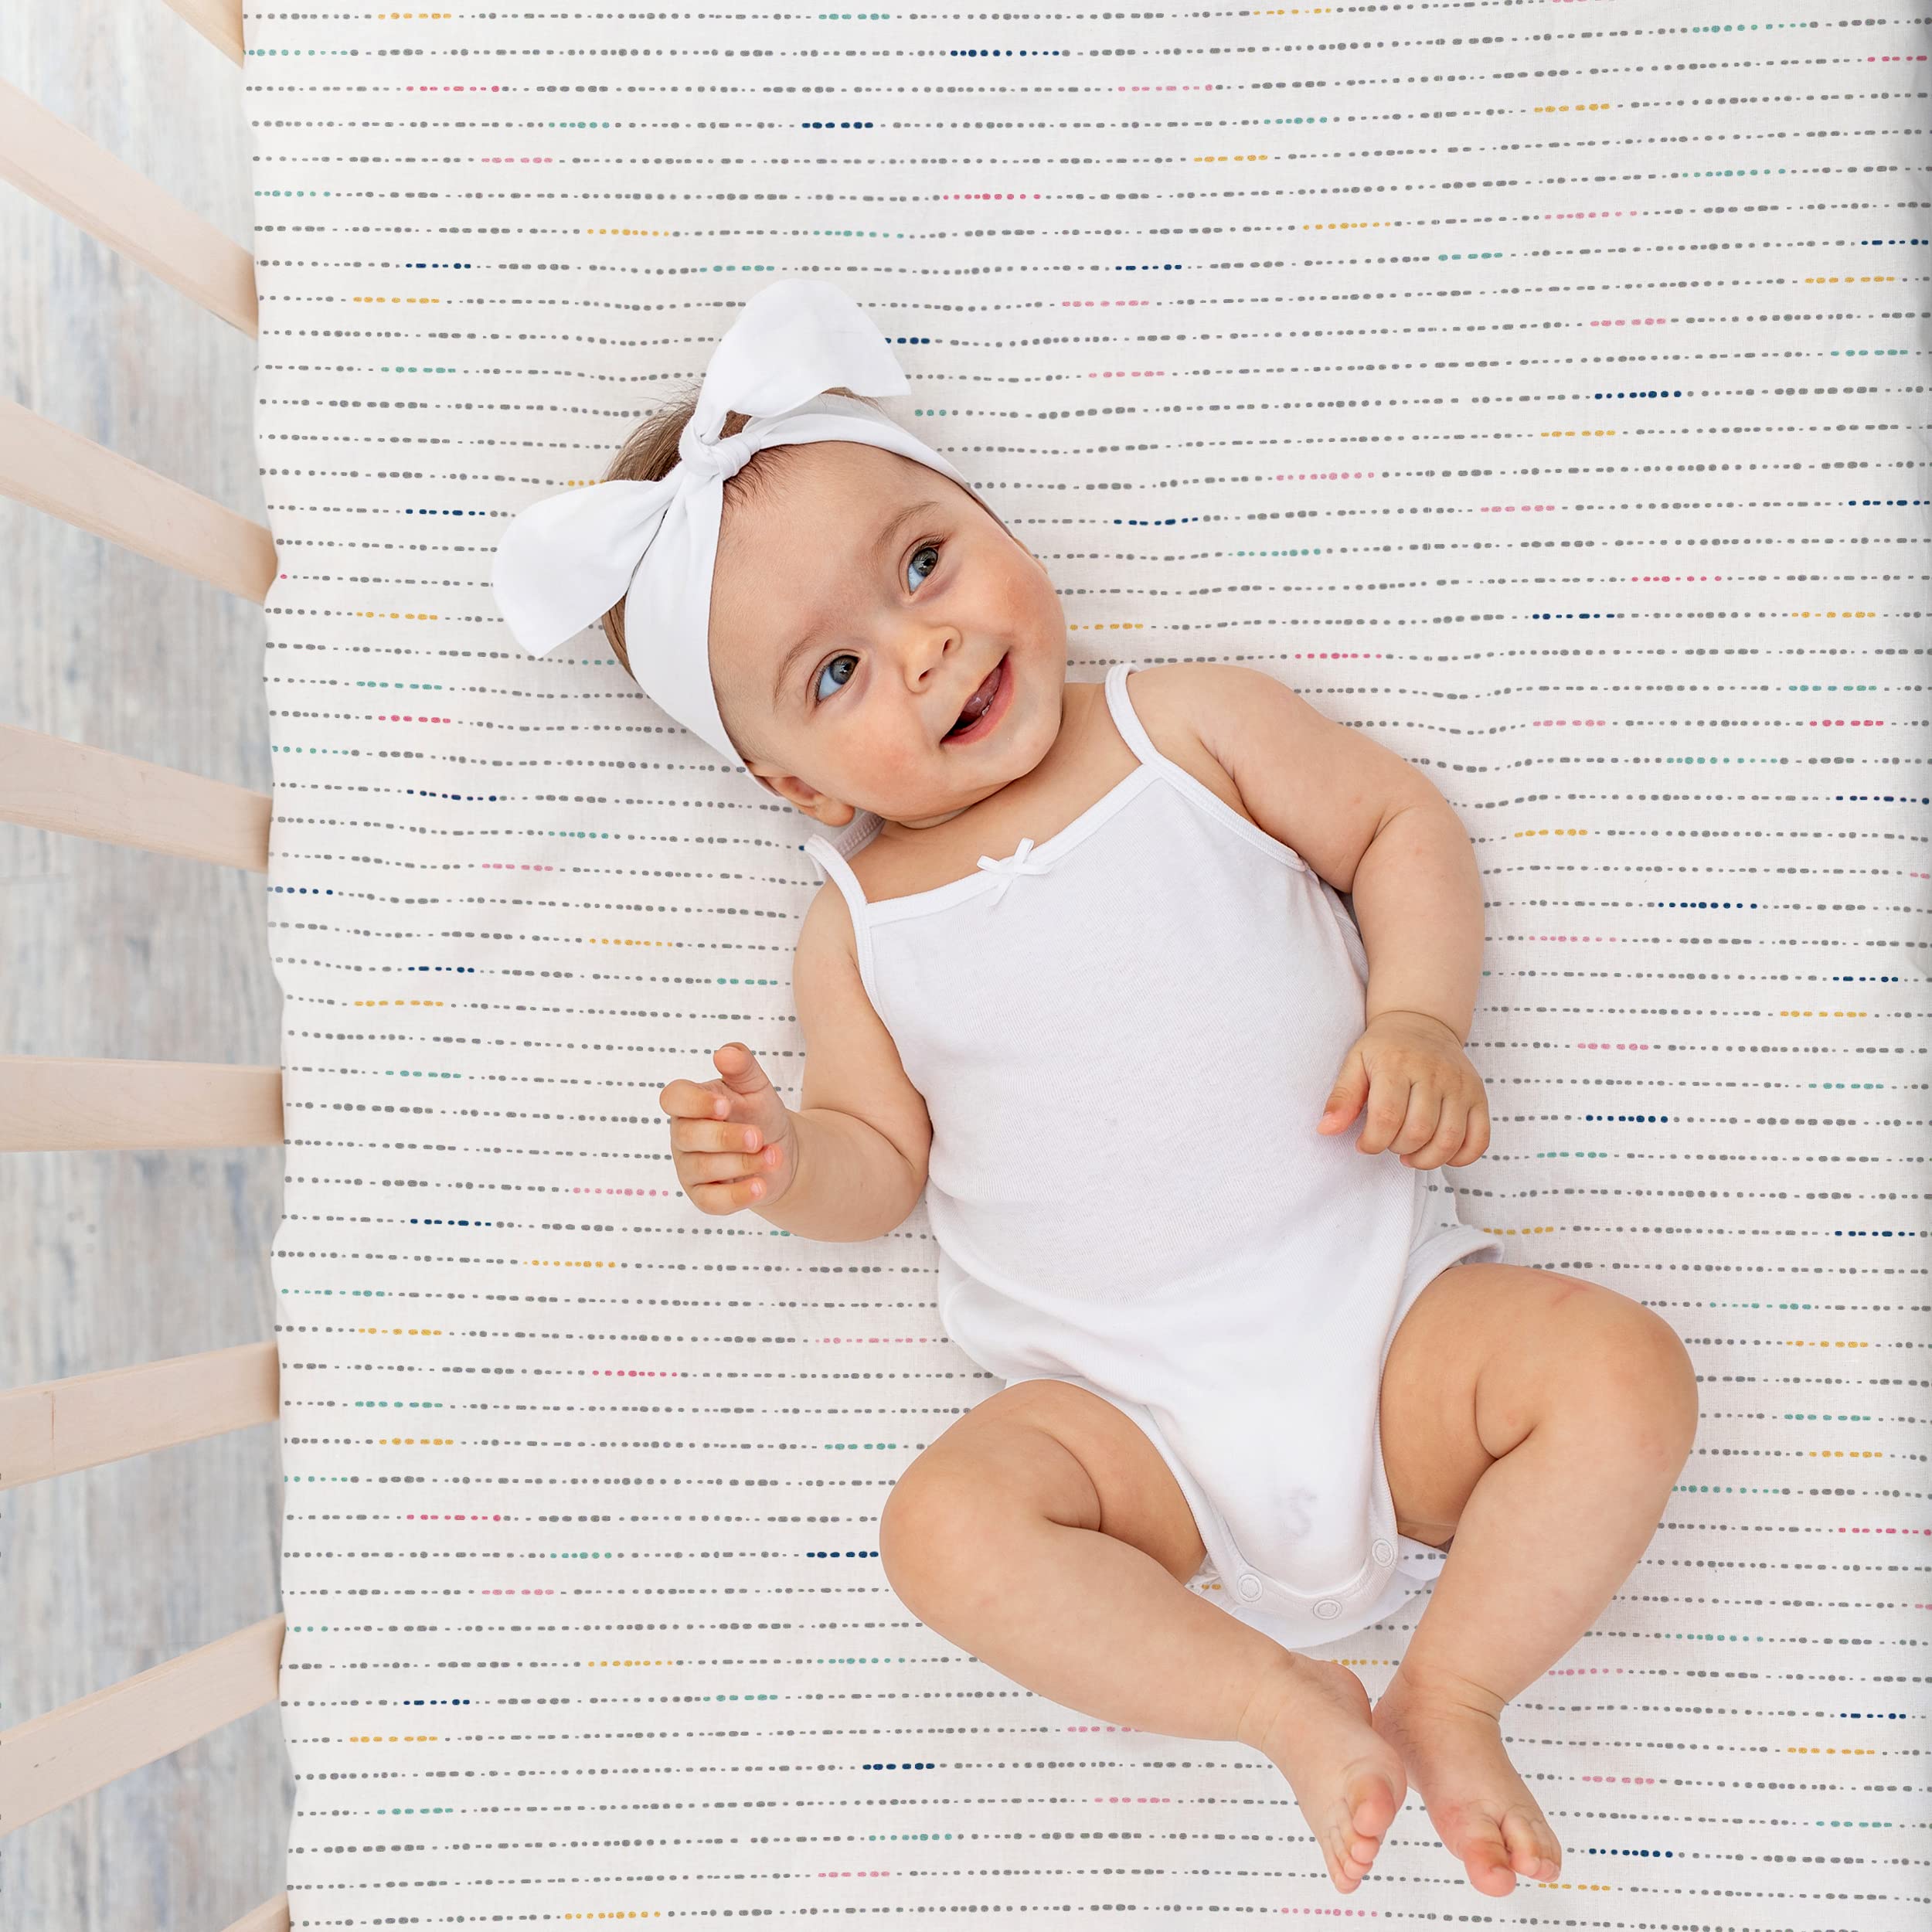 A joyful baby with a white bow headband lies on a striped mat, looking up with a delightful smile, dressed in a simple white onesie and resting on the Crib Fitted Sheet with Pillowcase - Pebble Pop by Makemake Organics.